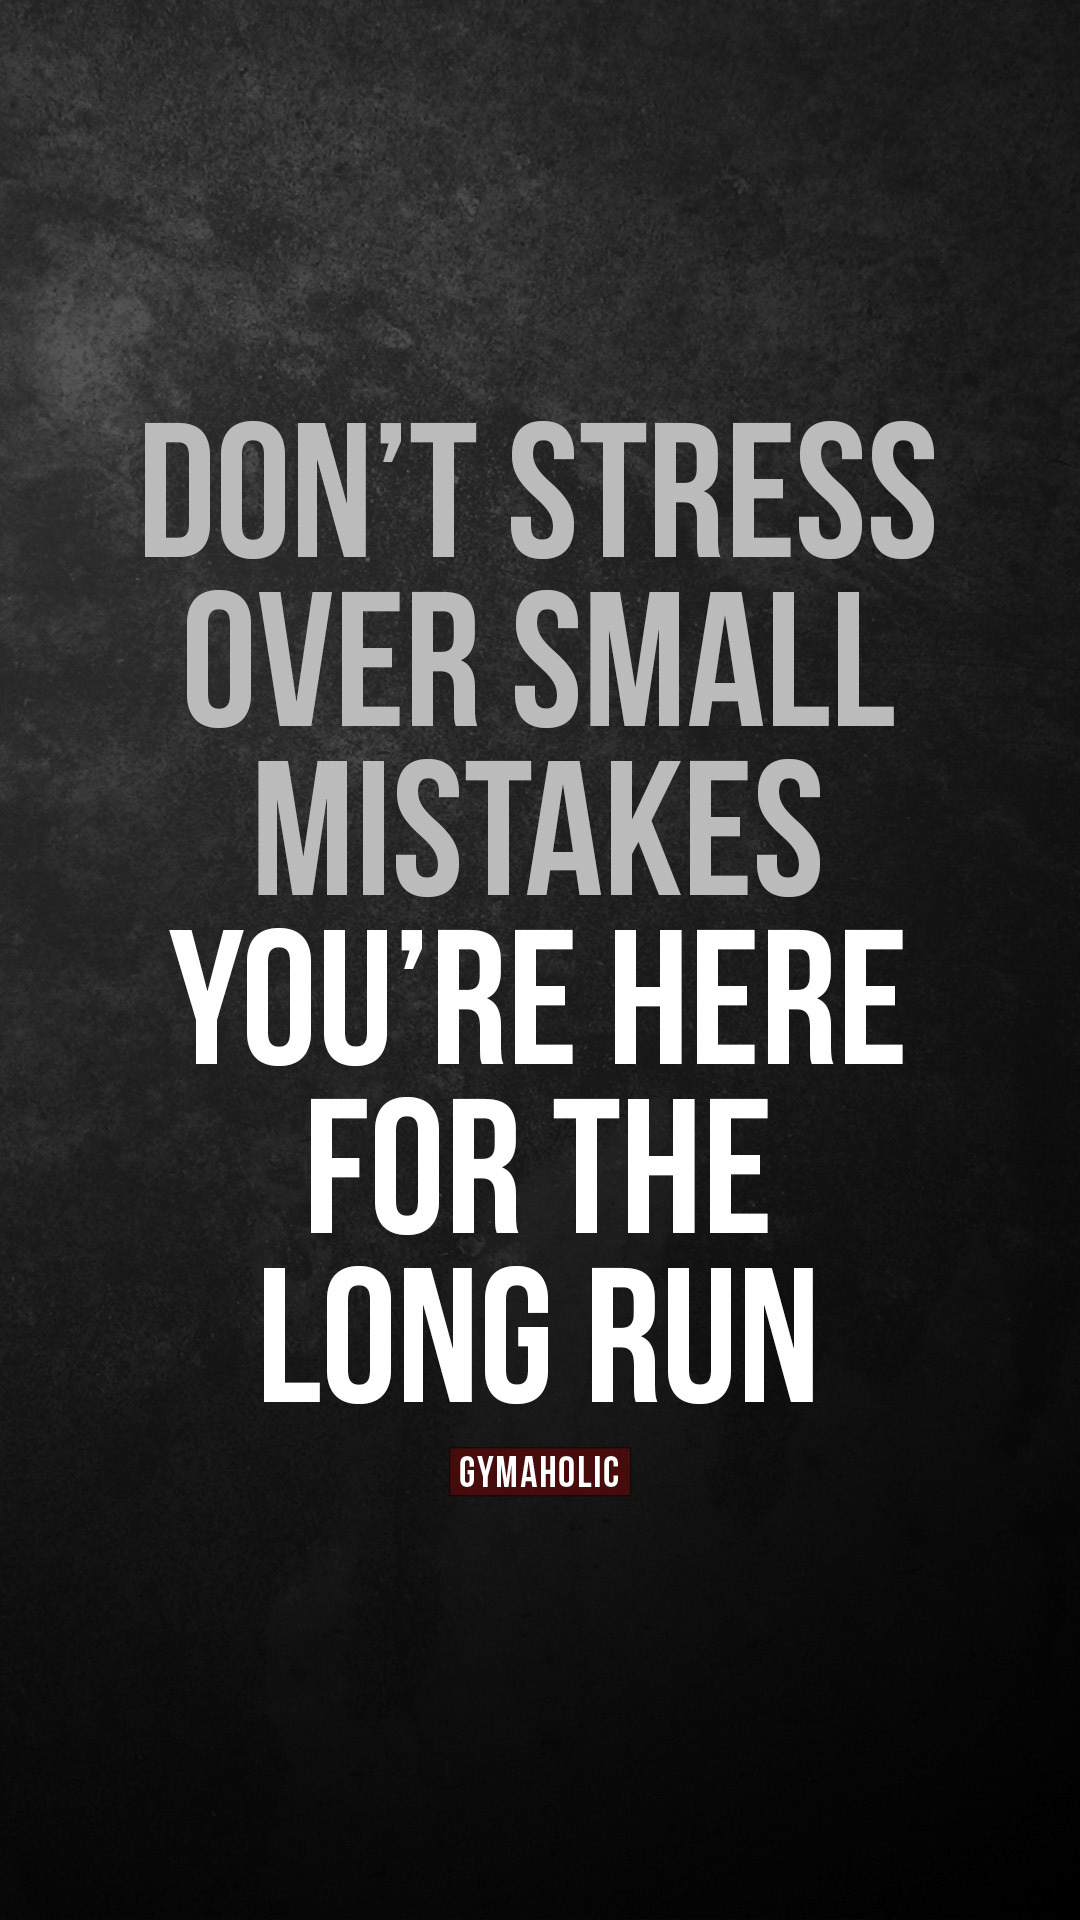 Don’t stress over small mistakes